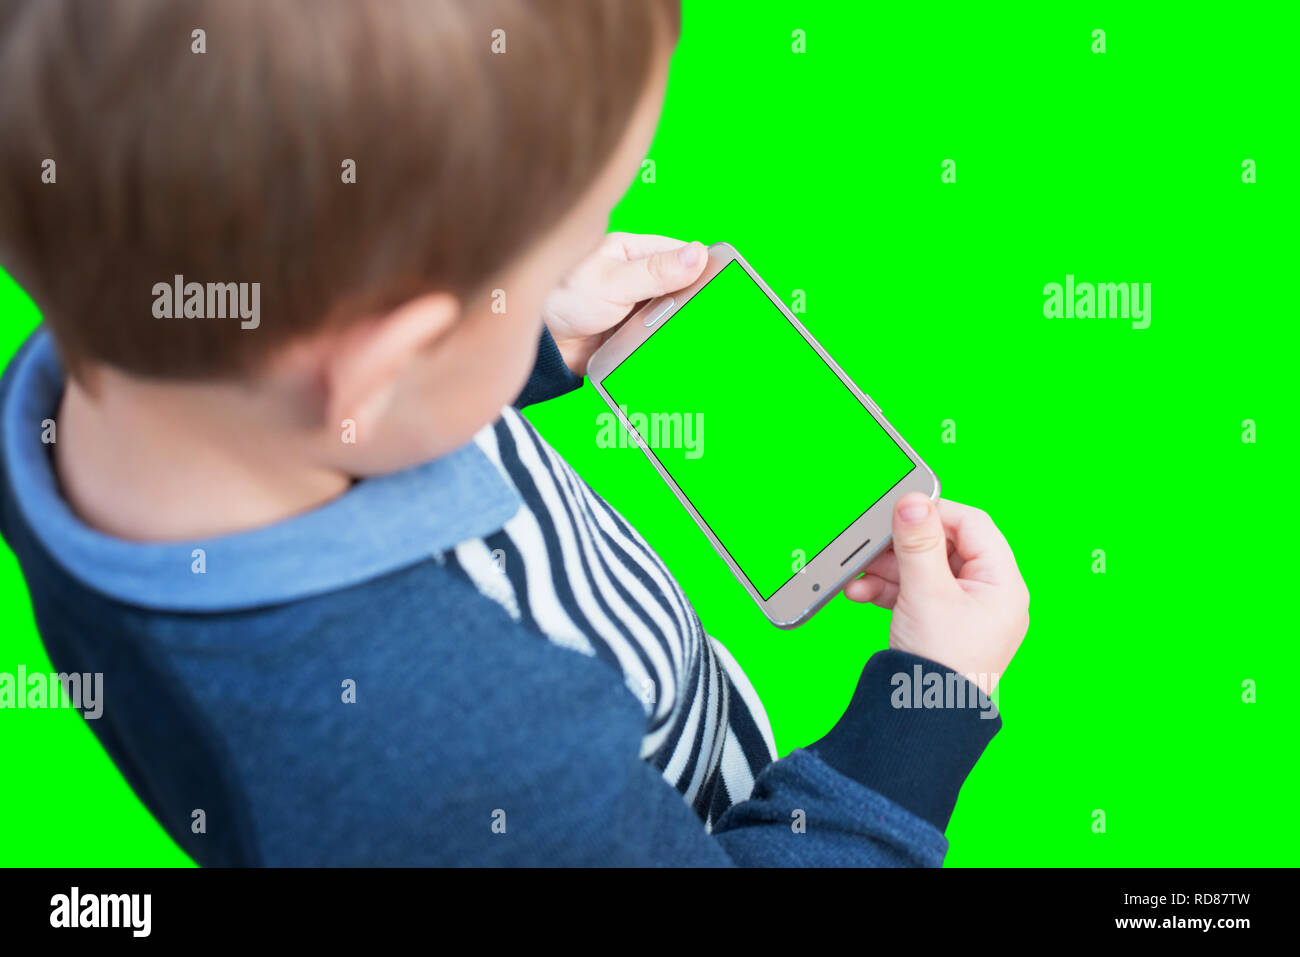 Kid holding smart phone in horizontal position. Isolated screen and background in green, chroma key. Stock Photo